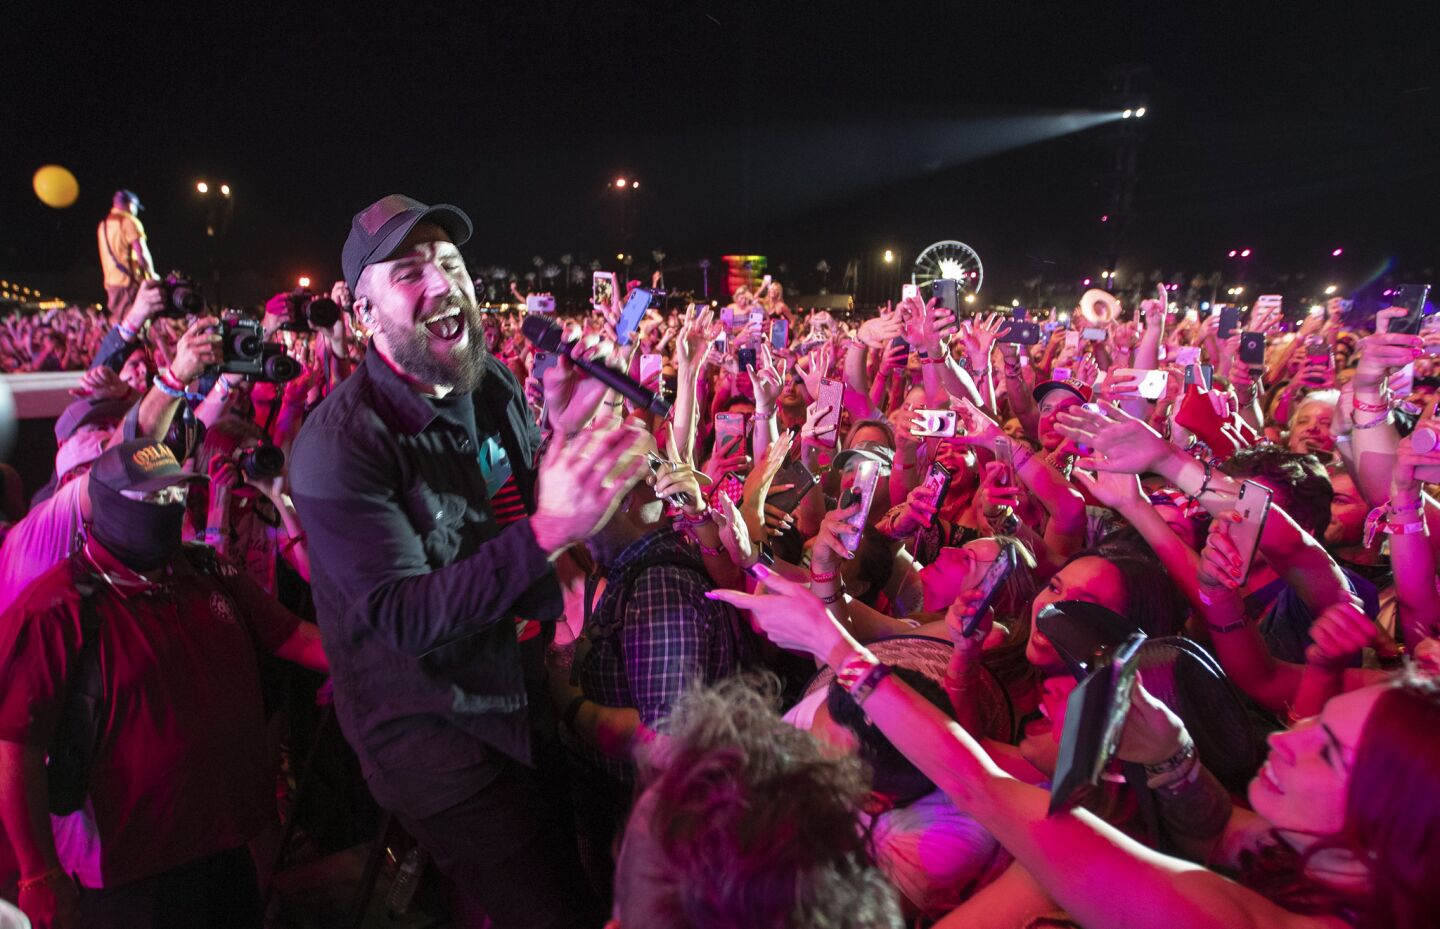 After climbing off stage, Saturday's headliner Sam Hunt sings up close with fans as he performs on the Mane Stage on the second of the three-day 2019 Stagecoach Country Music Festival.